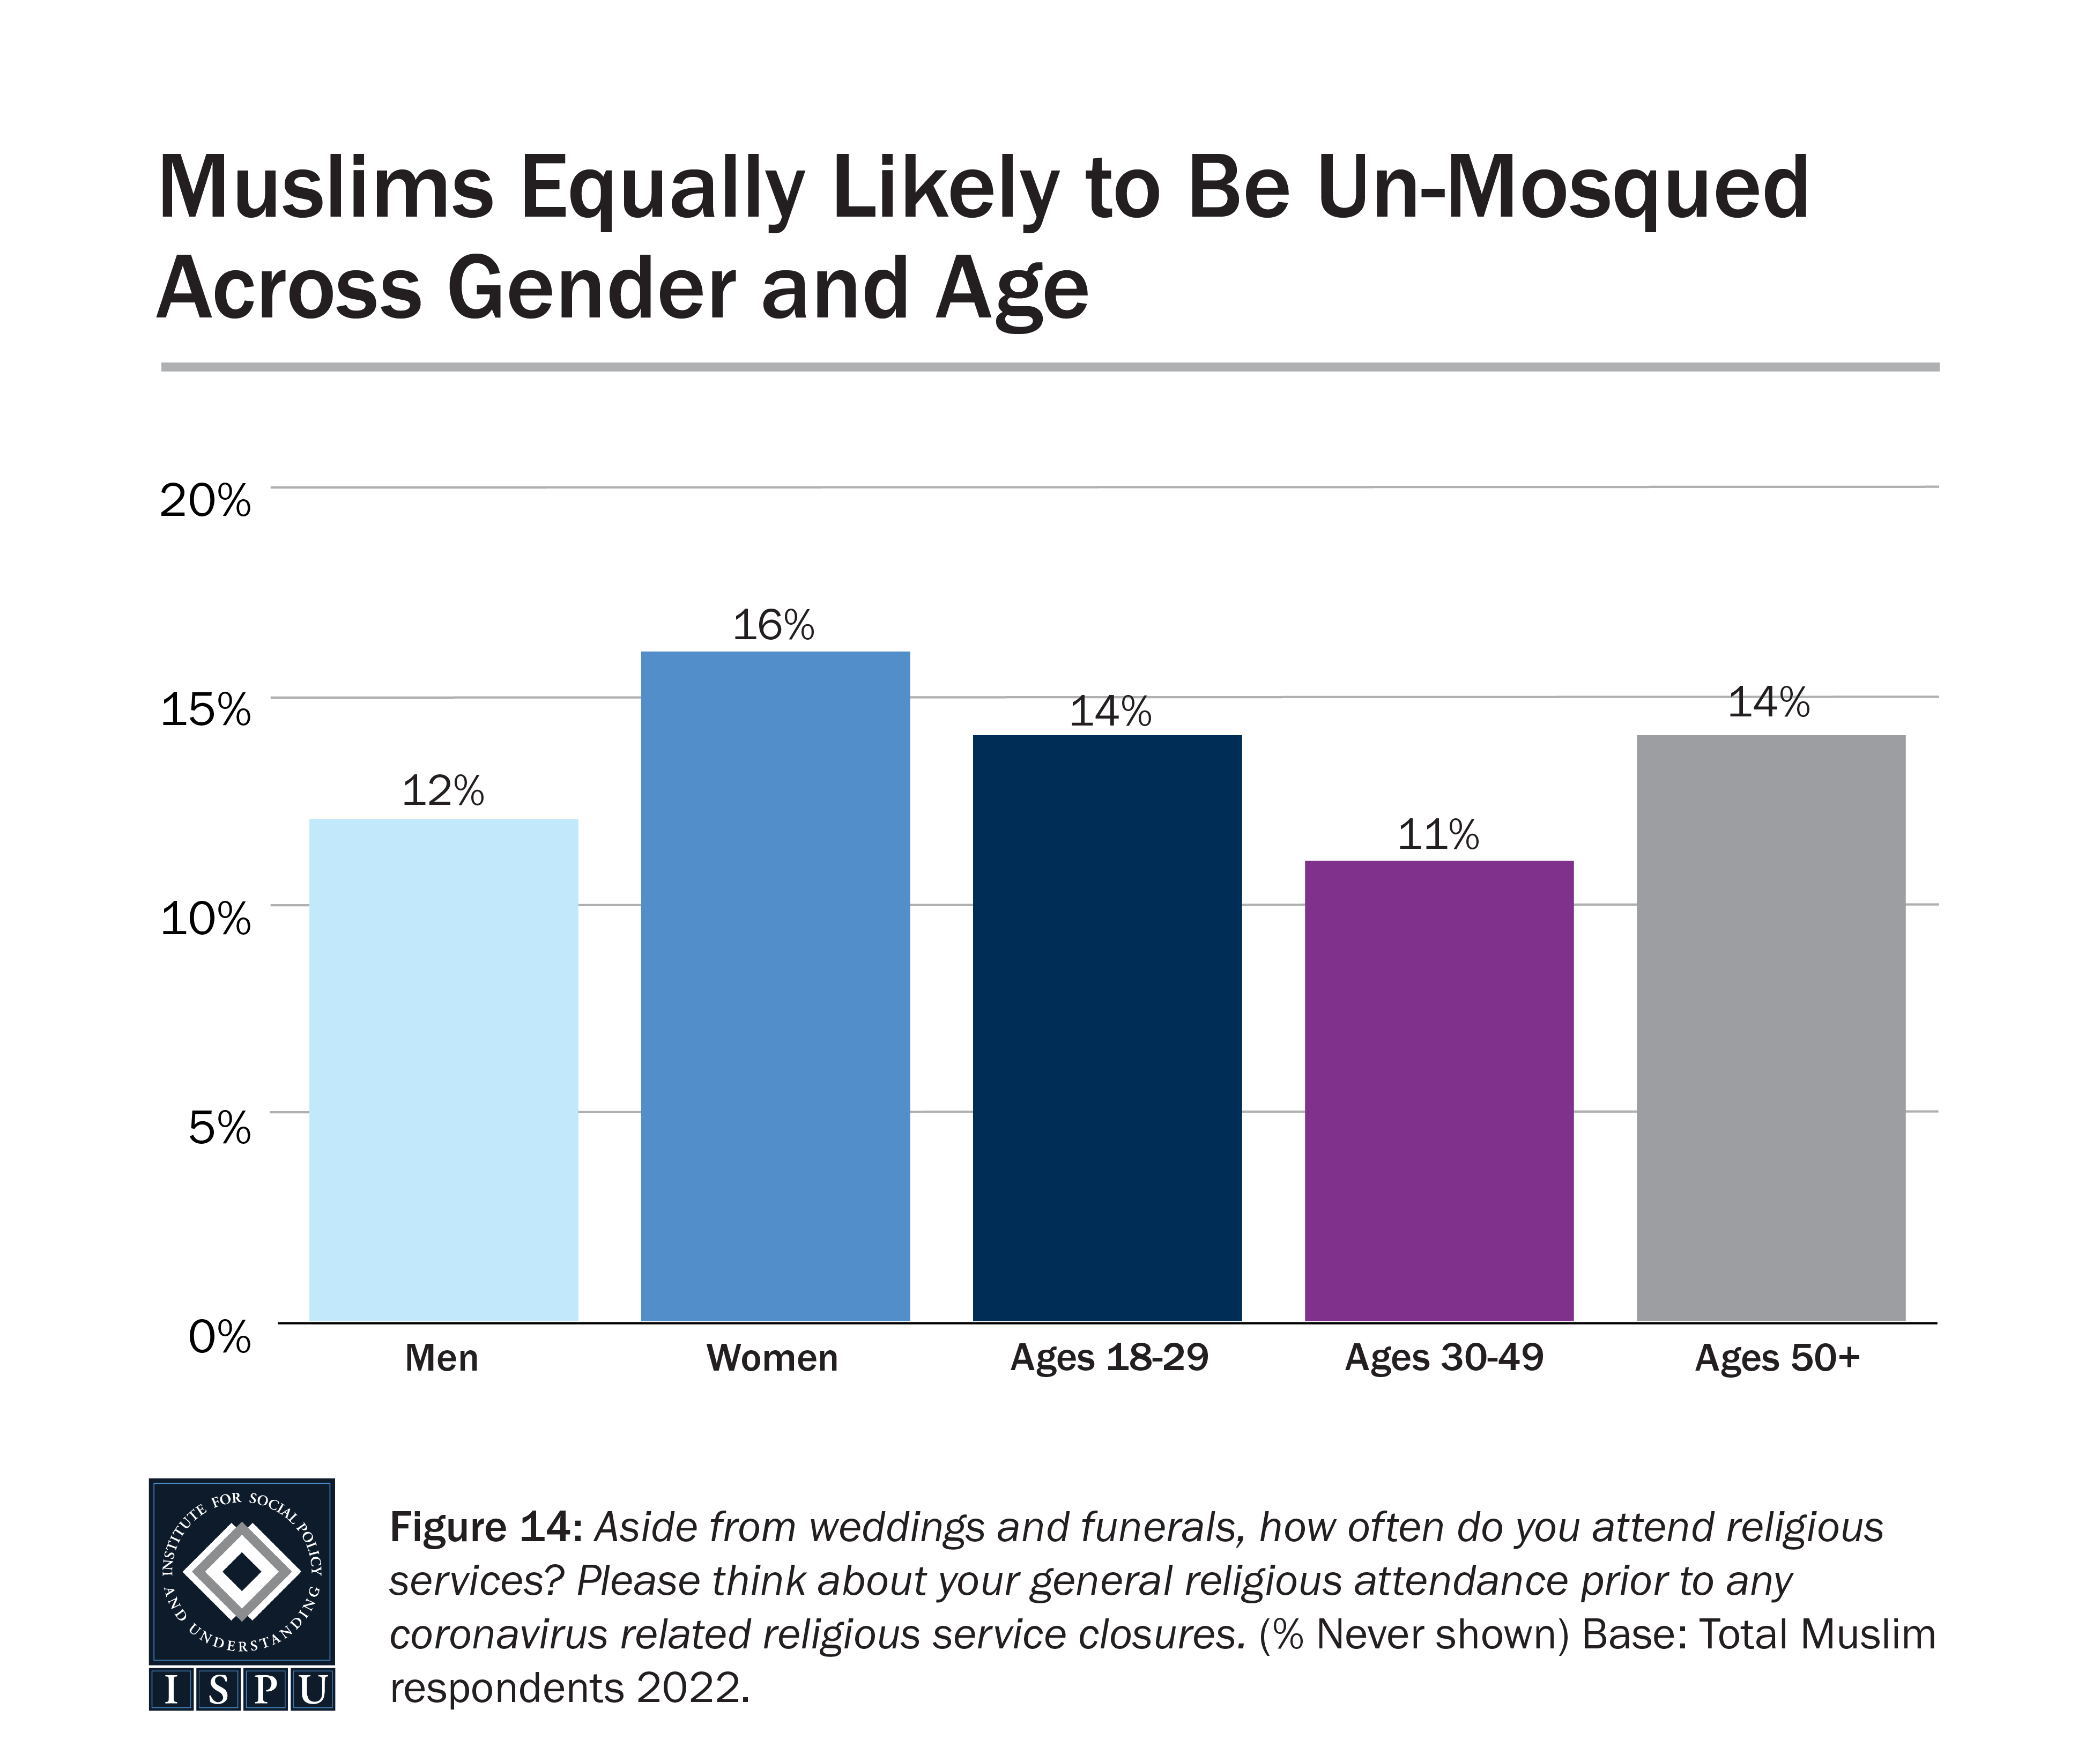 A bar graph showing the proportion across gender and age in the American Muslim community who are likely to be un-mosqued.